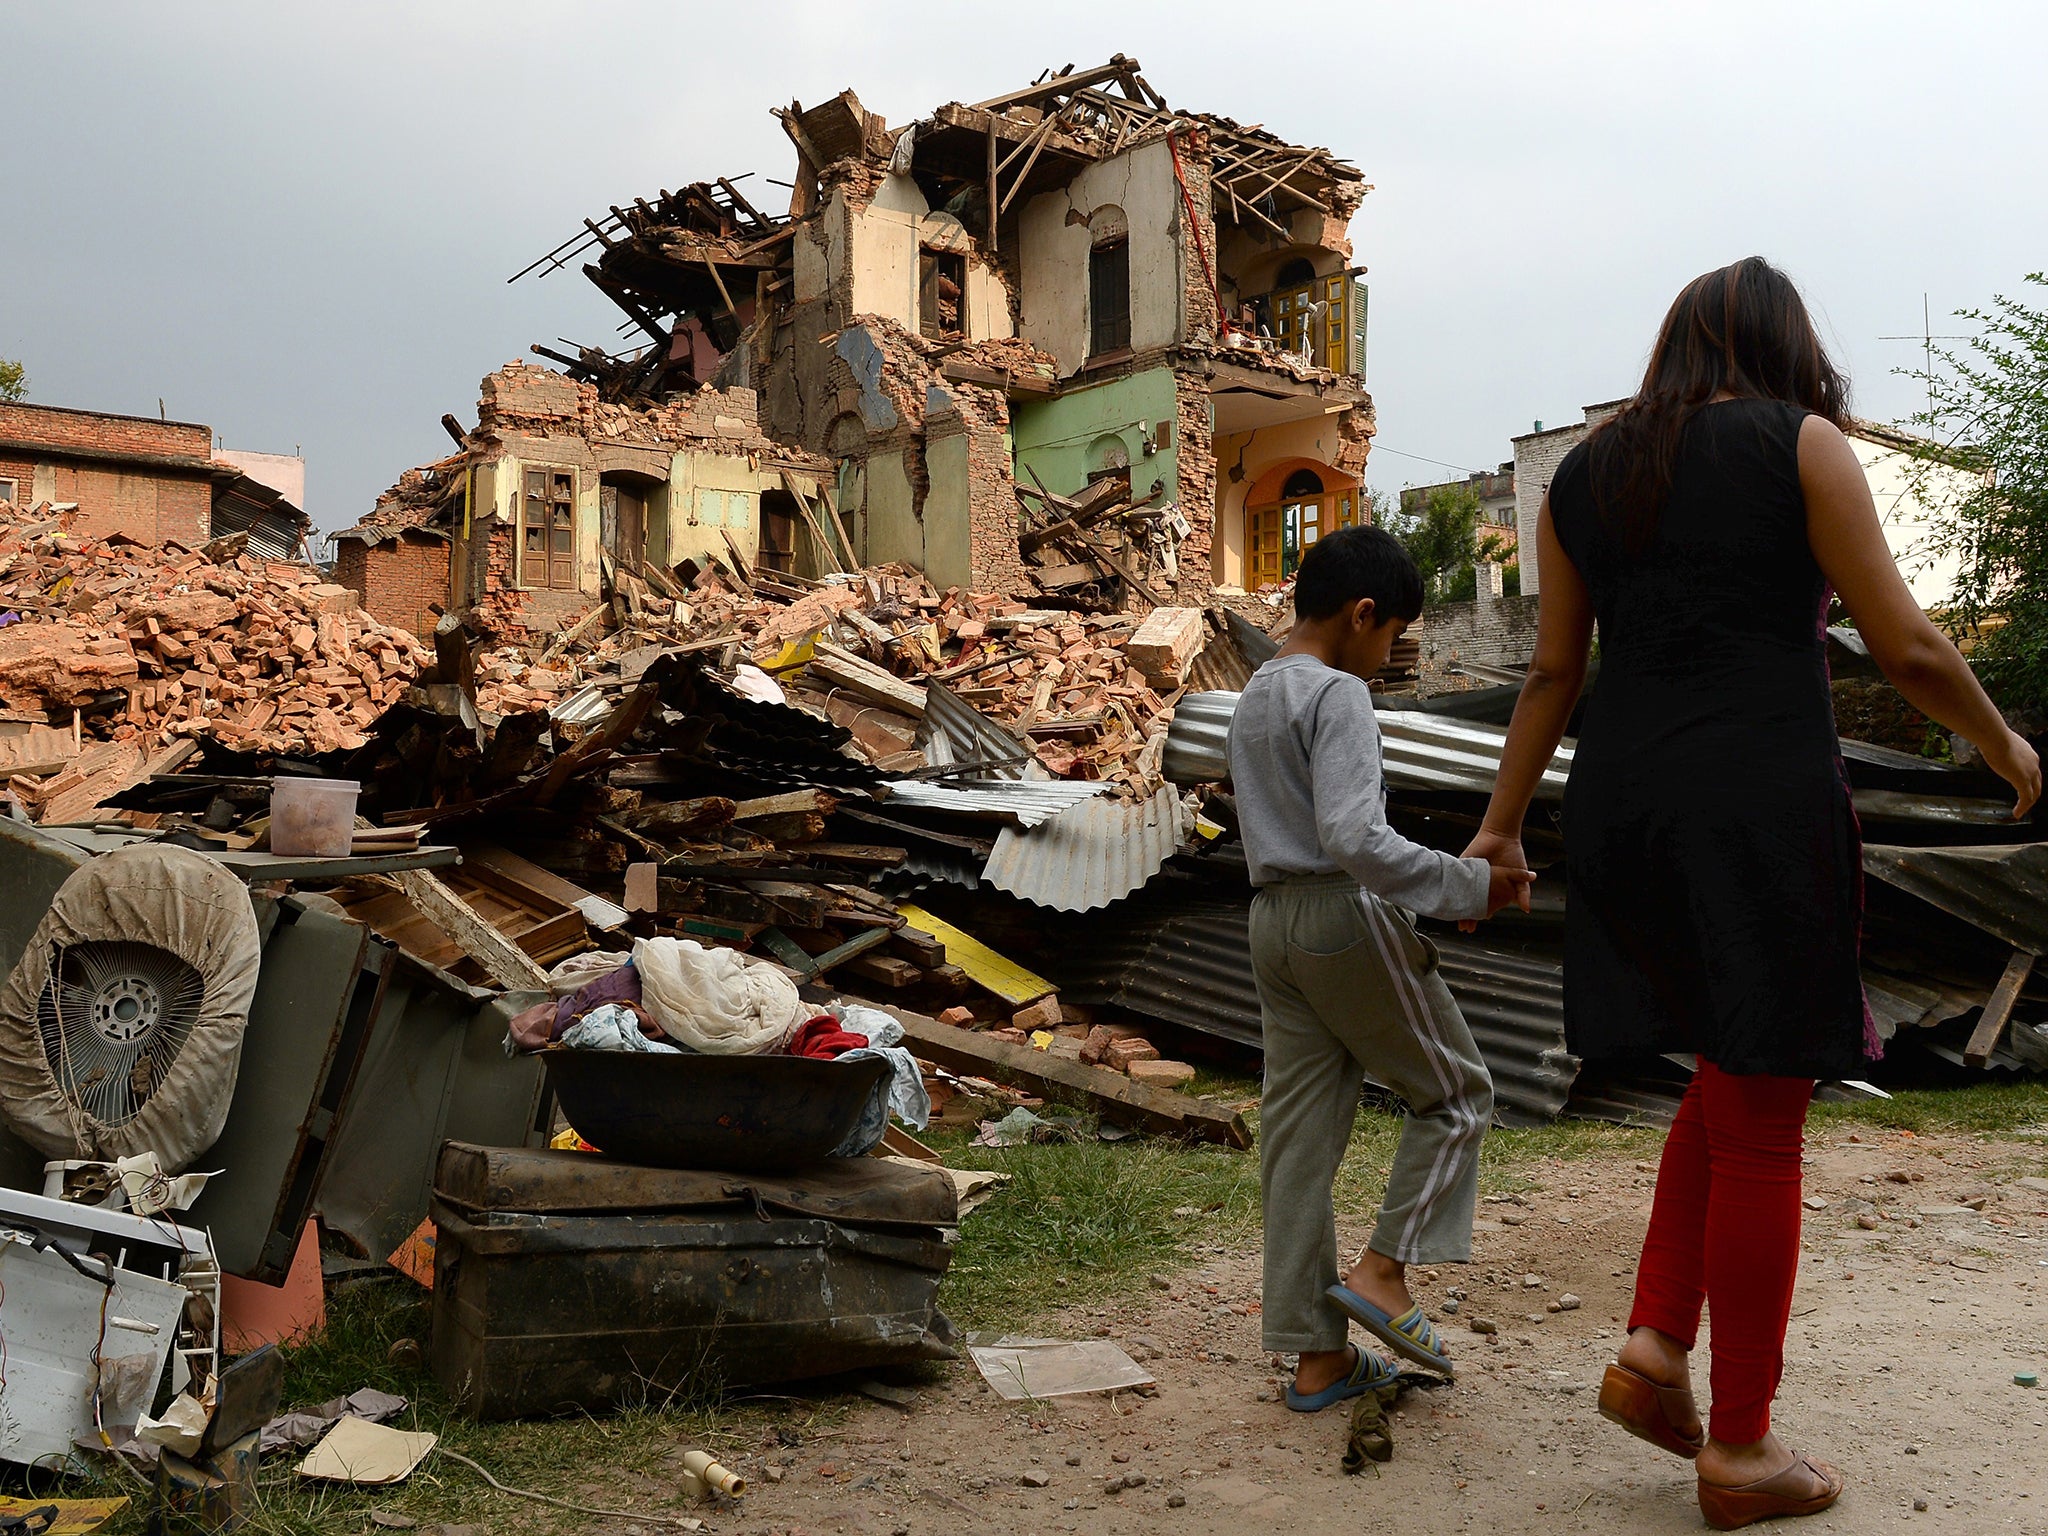 A house in Kathmandu that was destroyed during the earthquake in Nepal in 2015 (AFP/Getty)